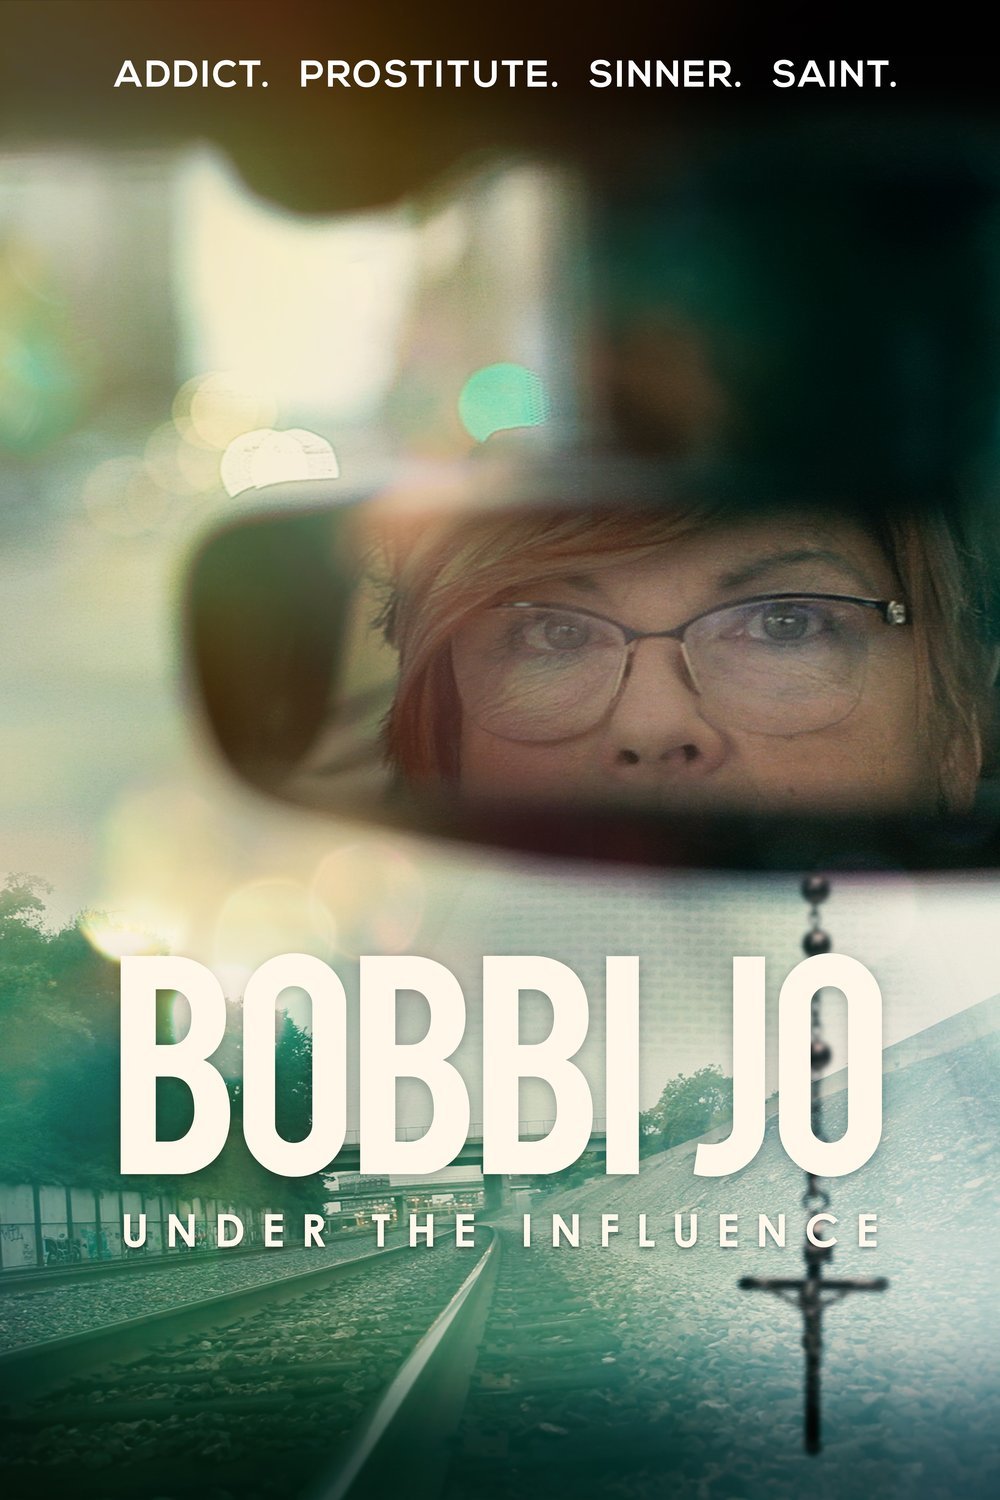 Poster of the movie Bobbi Jo: Under the Influence